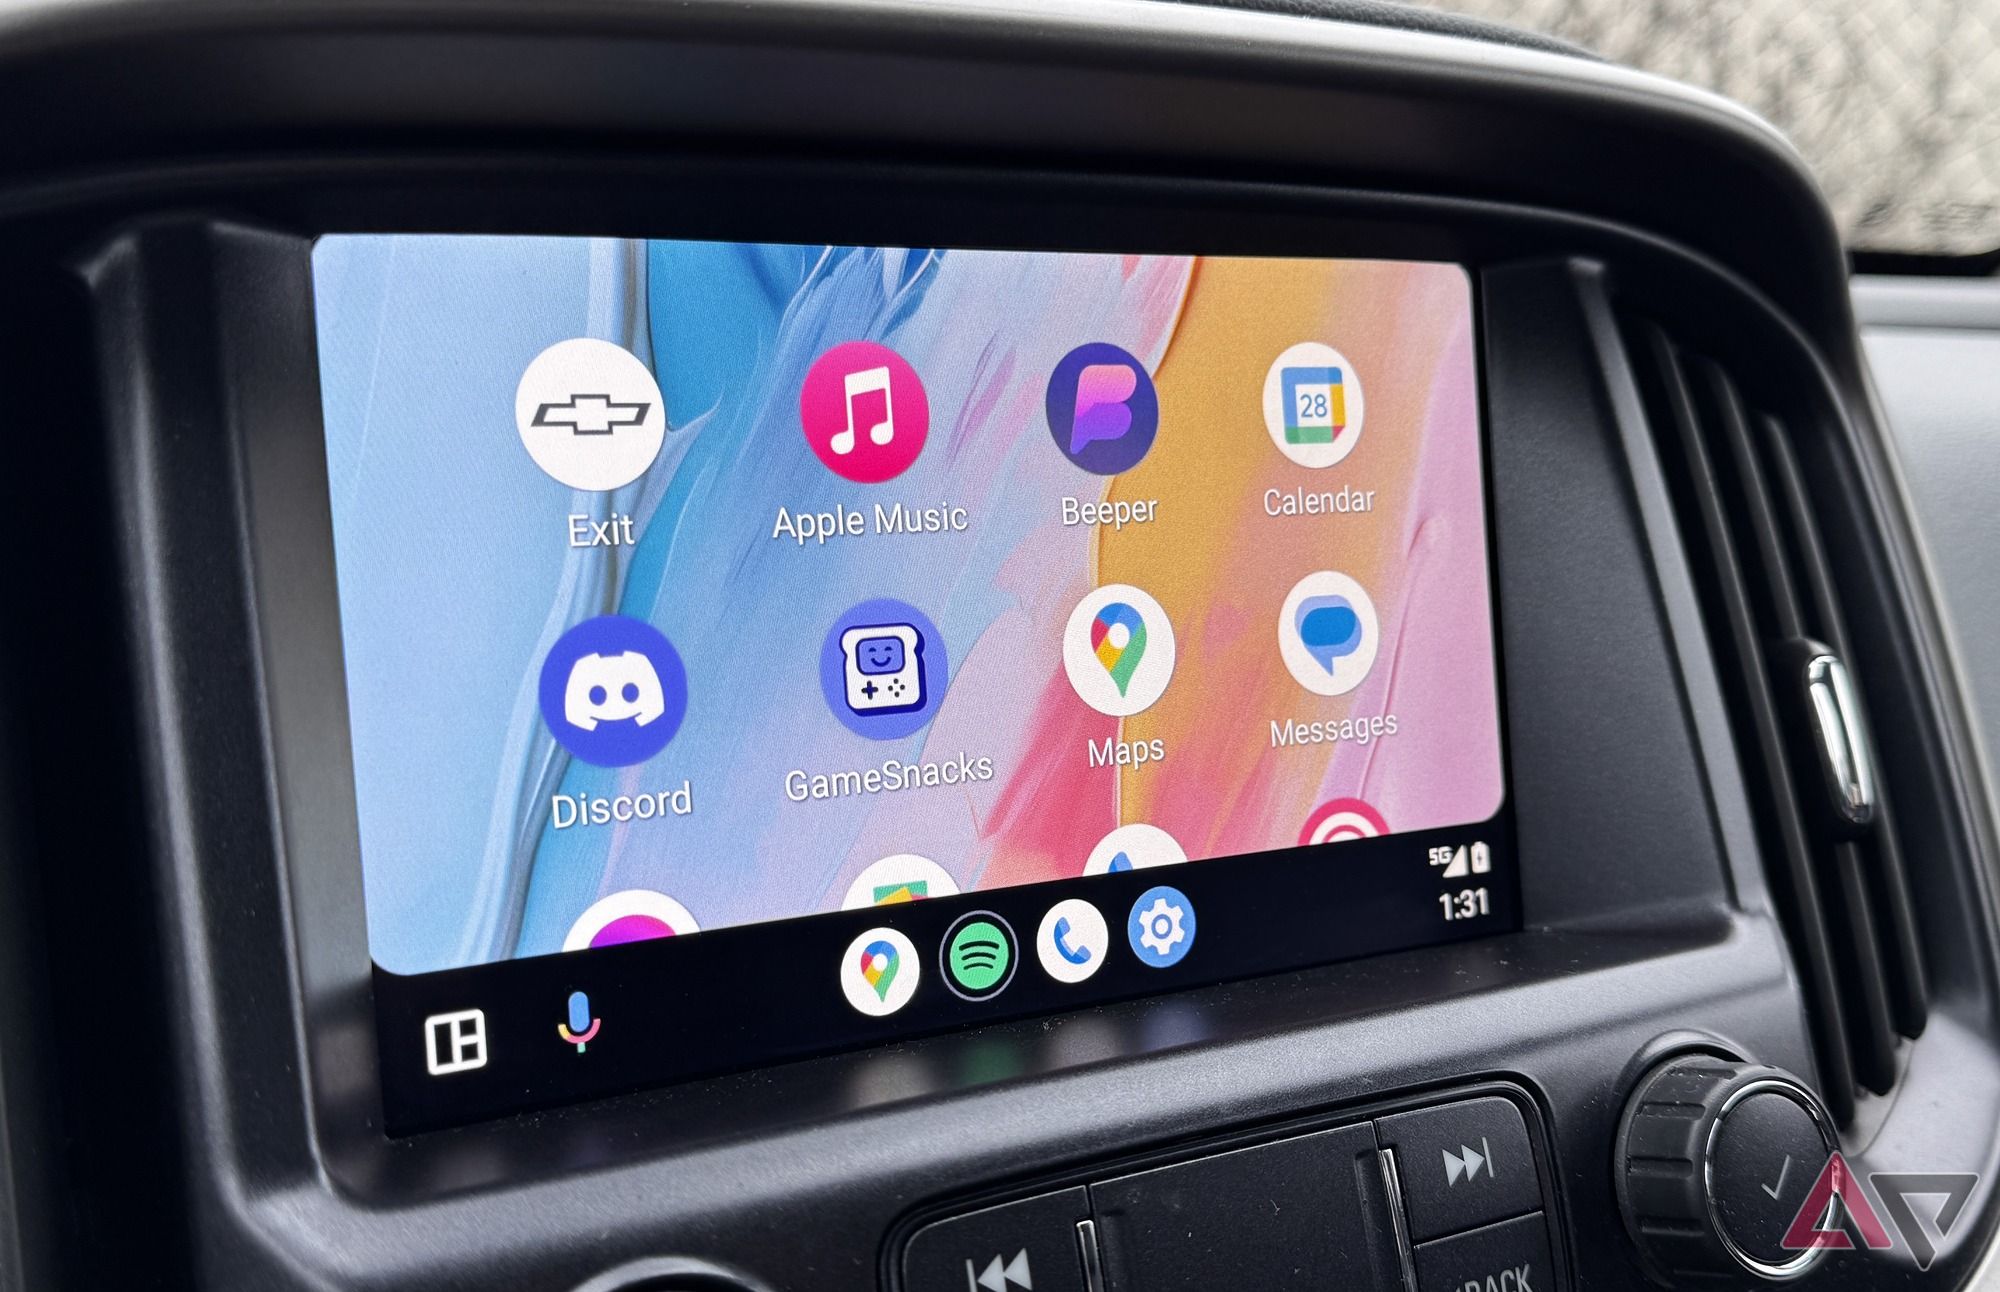 Google's new version of Android Auto focuses on Assistant